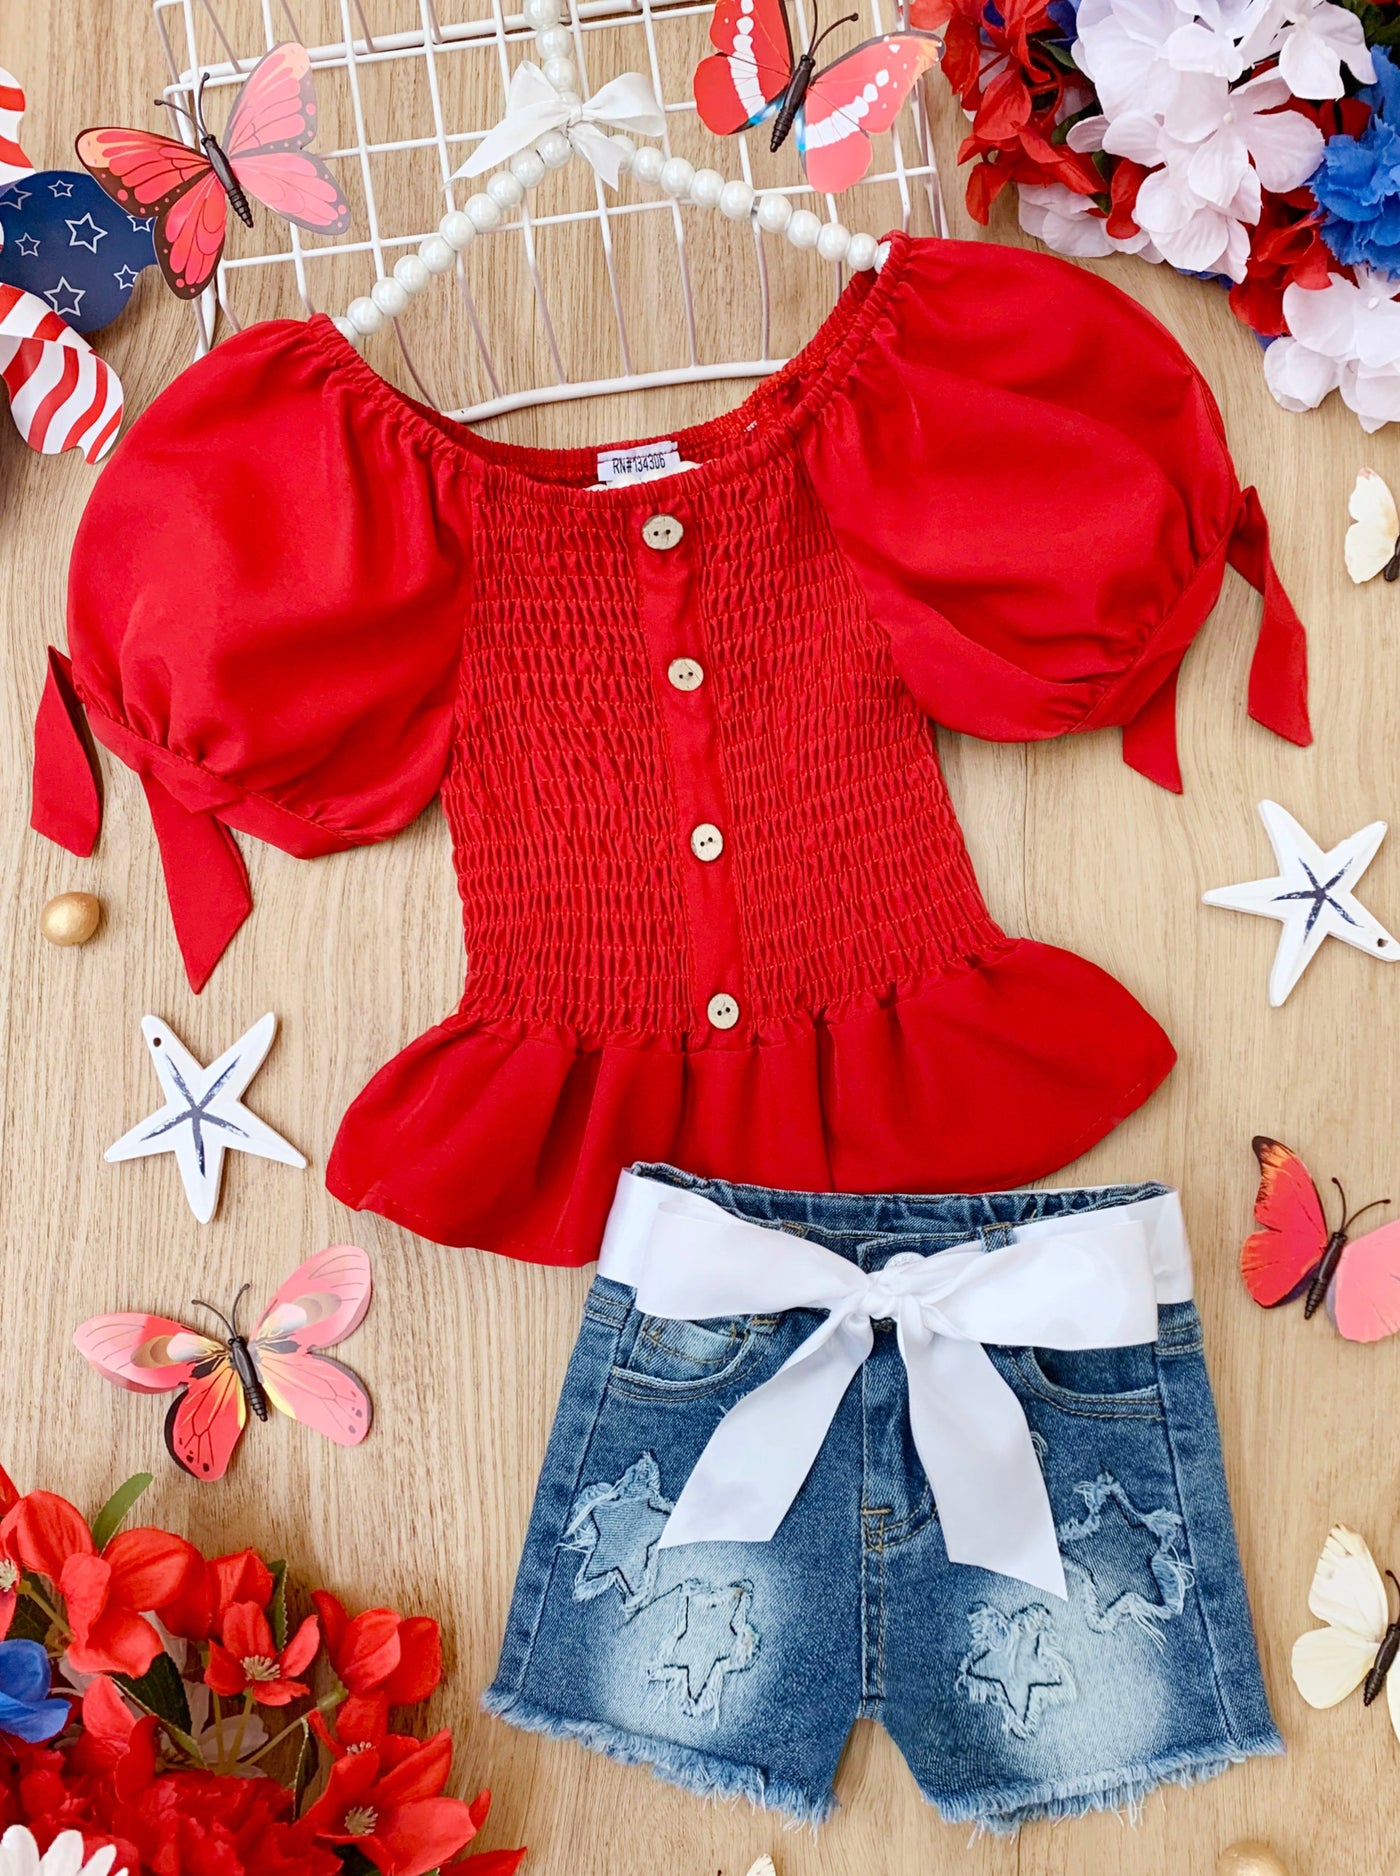 Girls 4th of July Outfits | Red Smocked Top & Star Patched Shorts Set